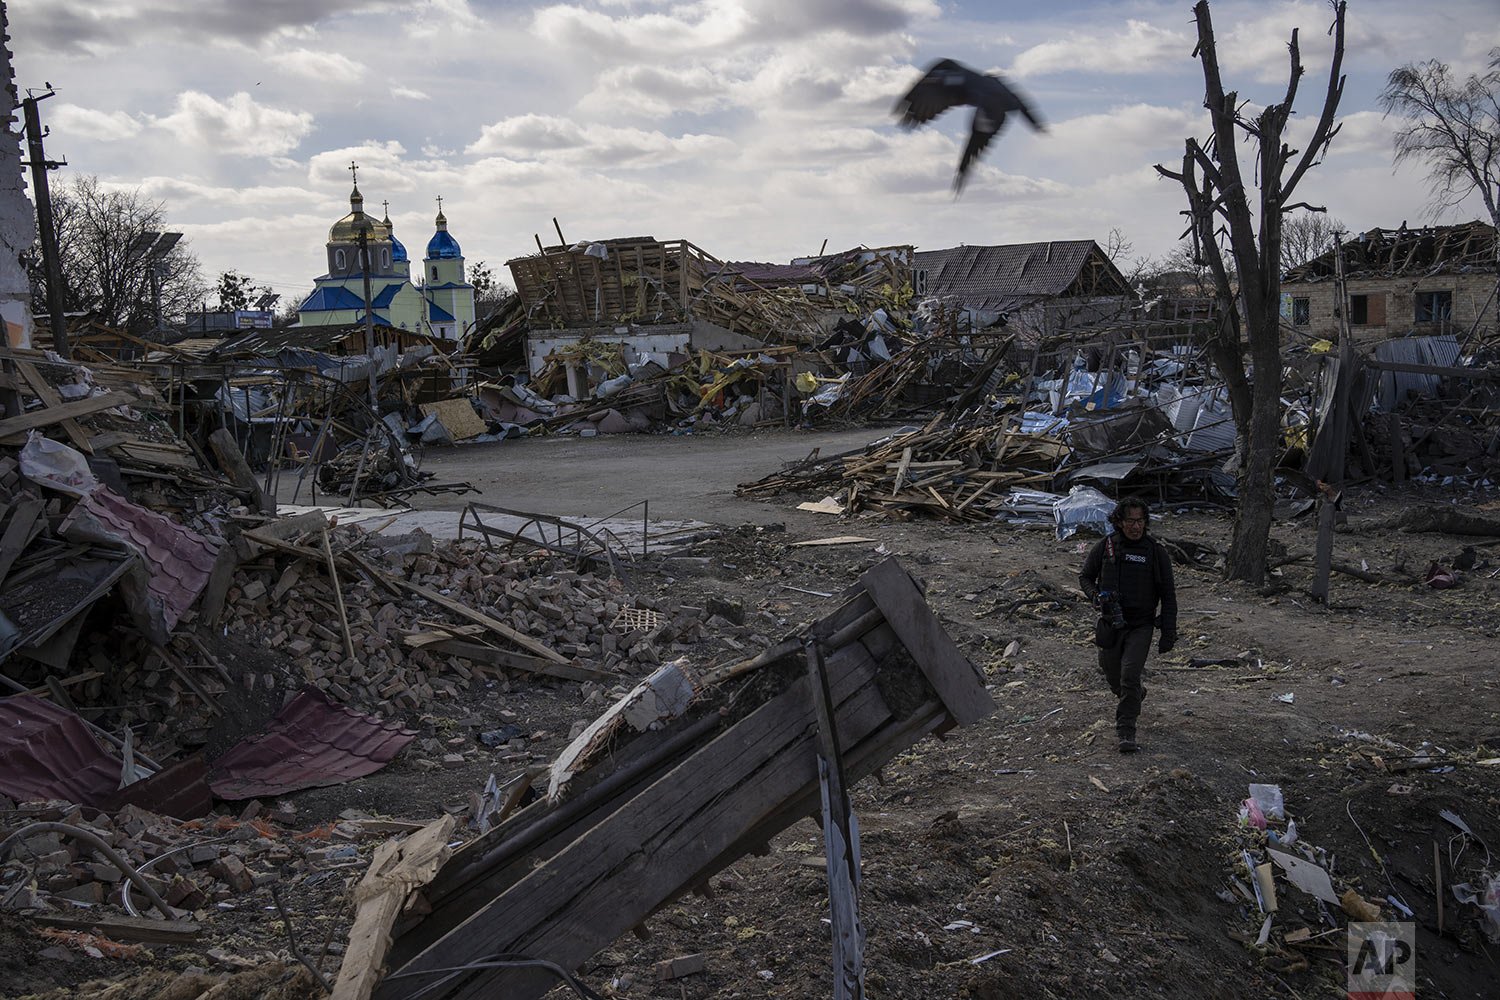  A journalist walks amid the destruction after a Russian attack in Byshiv on the outskirts of Kyiv, Ukraine, Sunday, March 27, 2022. (AP Photo/Rodrigo Abd) 